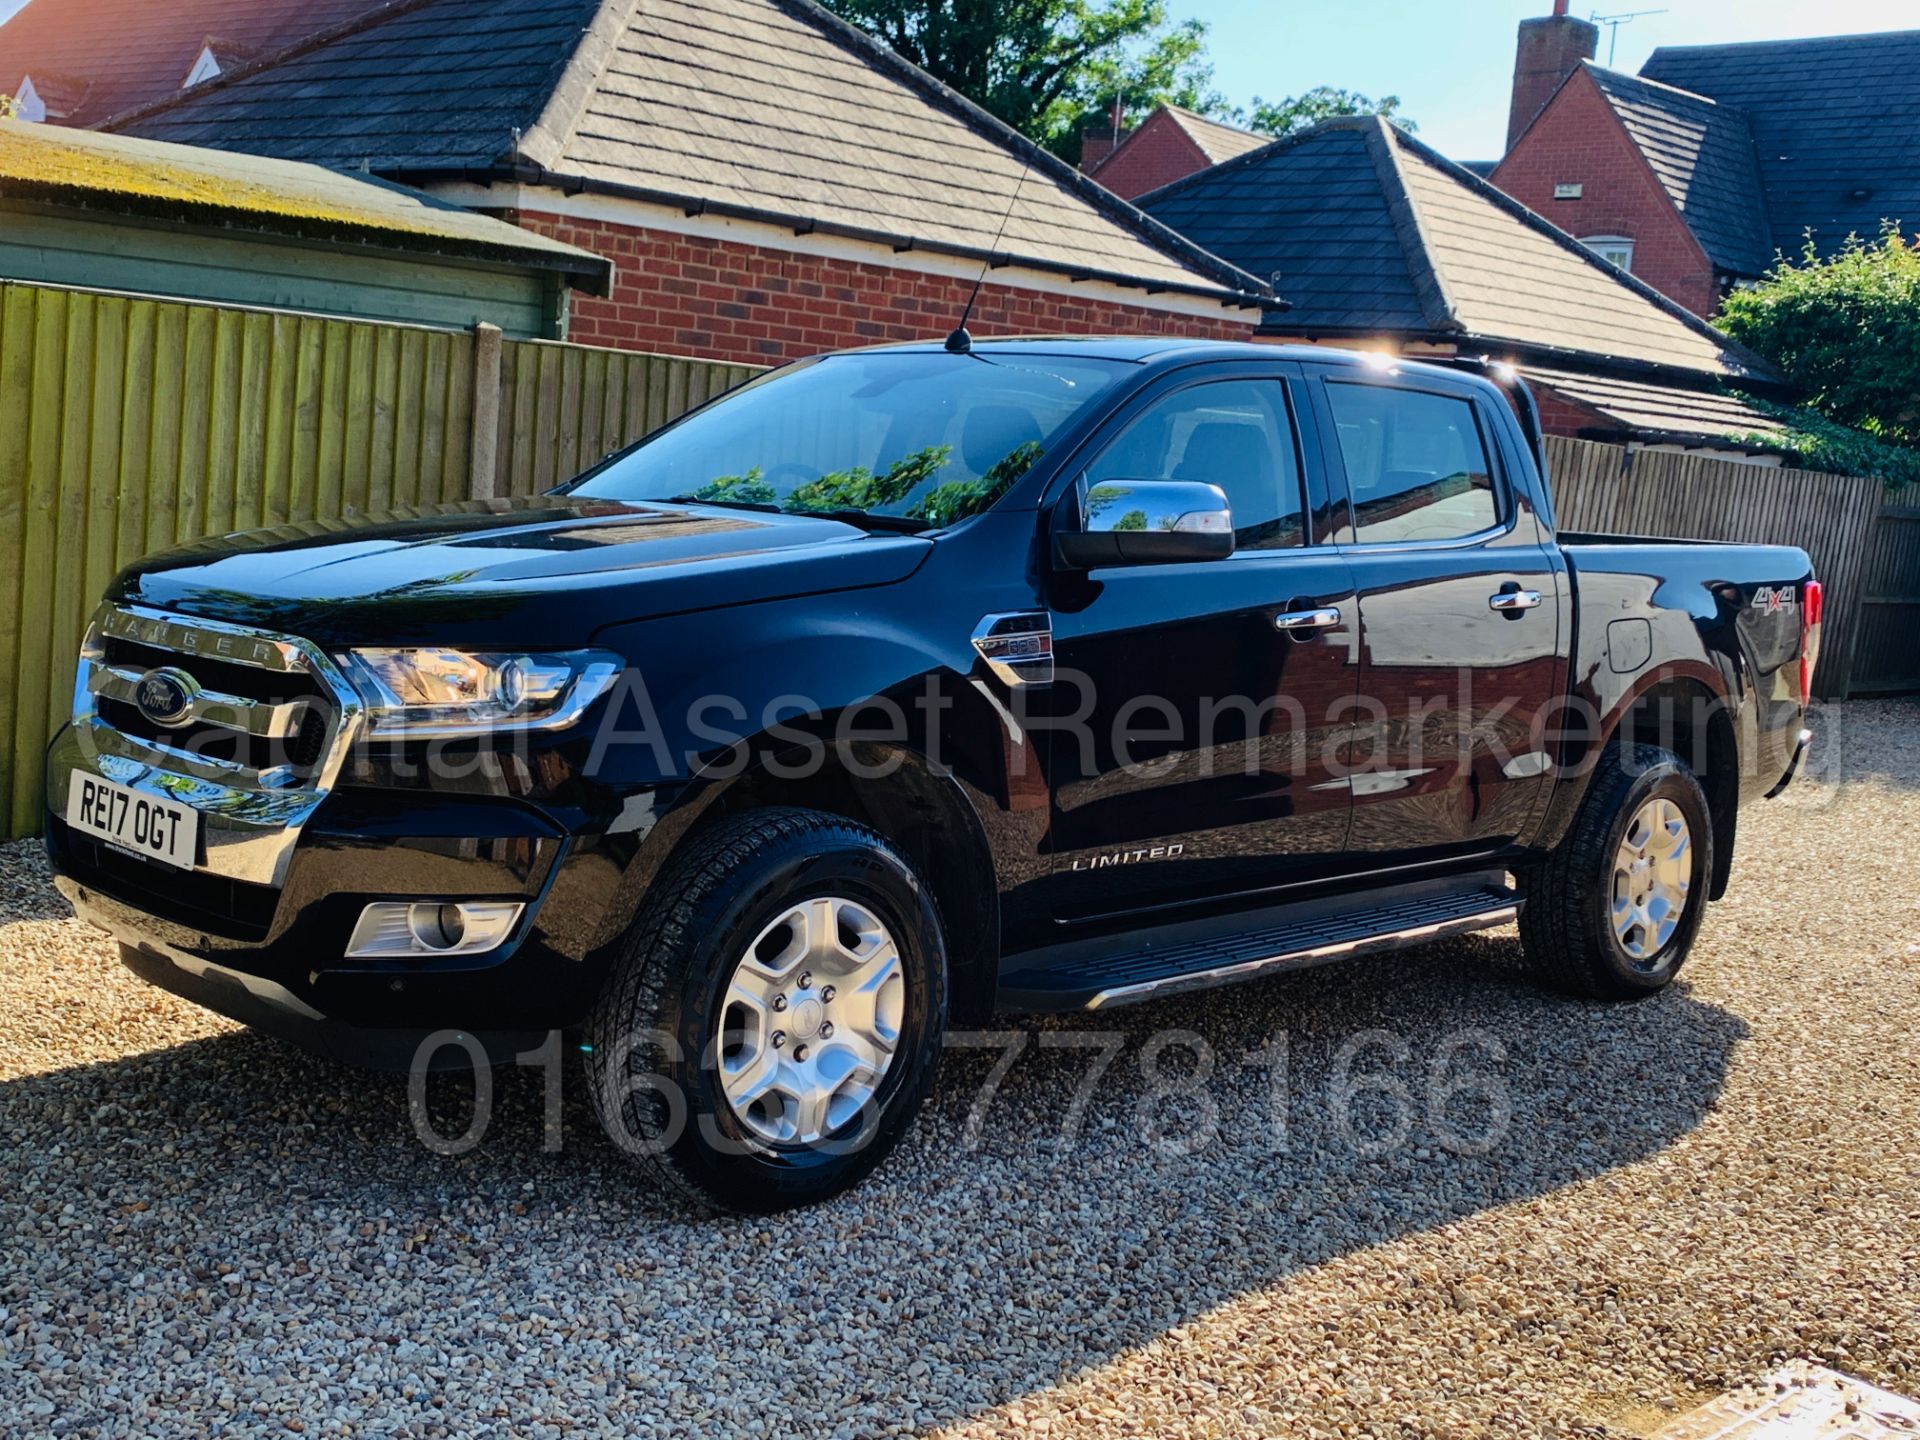 (On Sale) FORD RANGER *LIMITED* D/CAB (2017) '3.2 TDCI - 200 BHP-AUTO' *LEATHER - SAT NAV* (1 OWNER) - Image 5 of 49